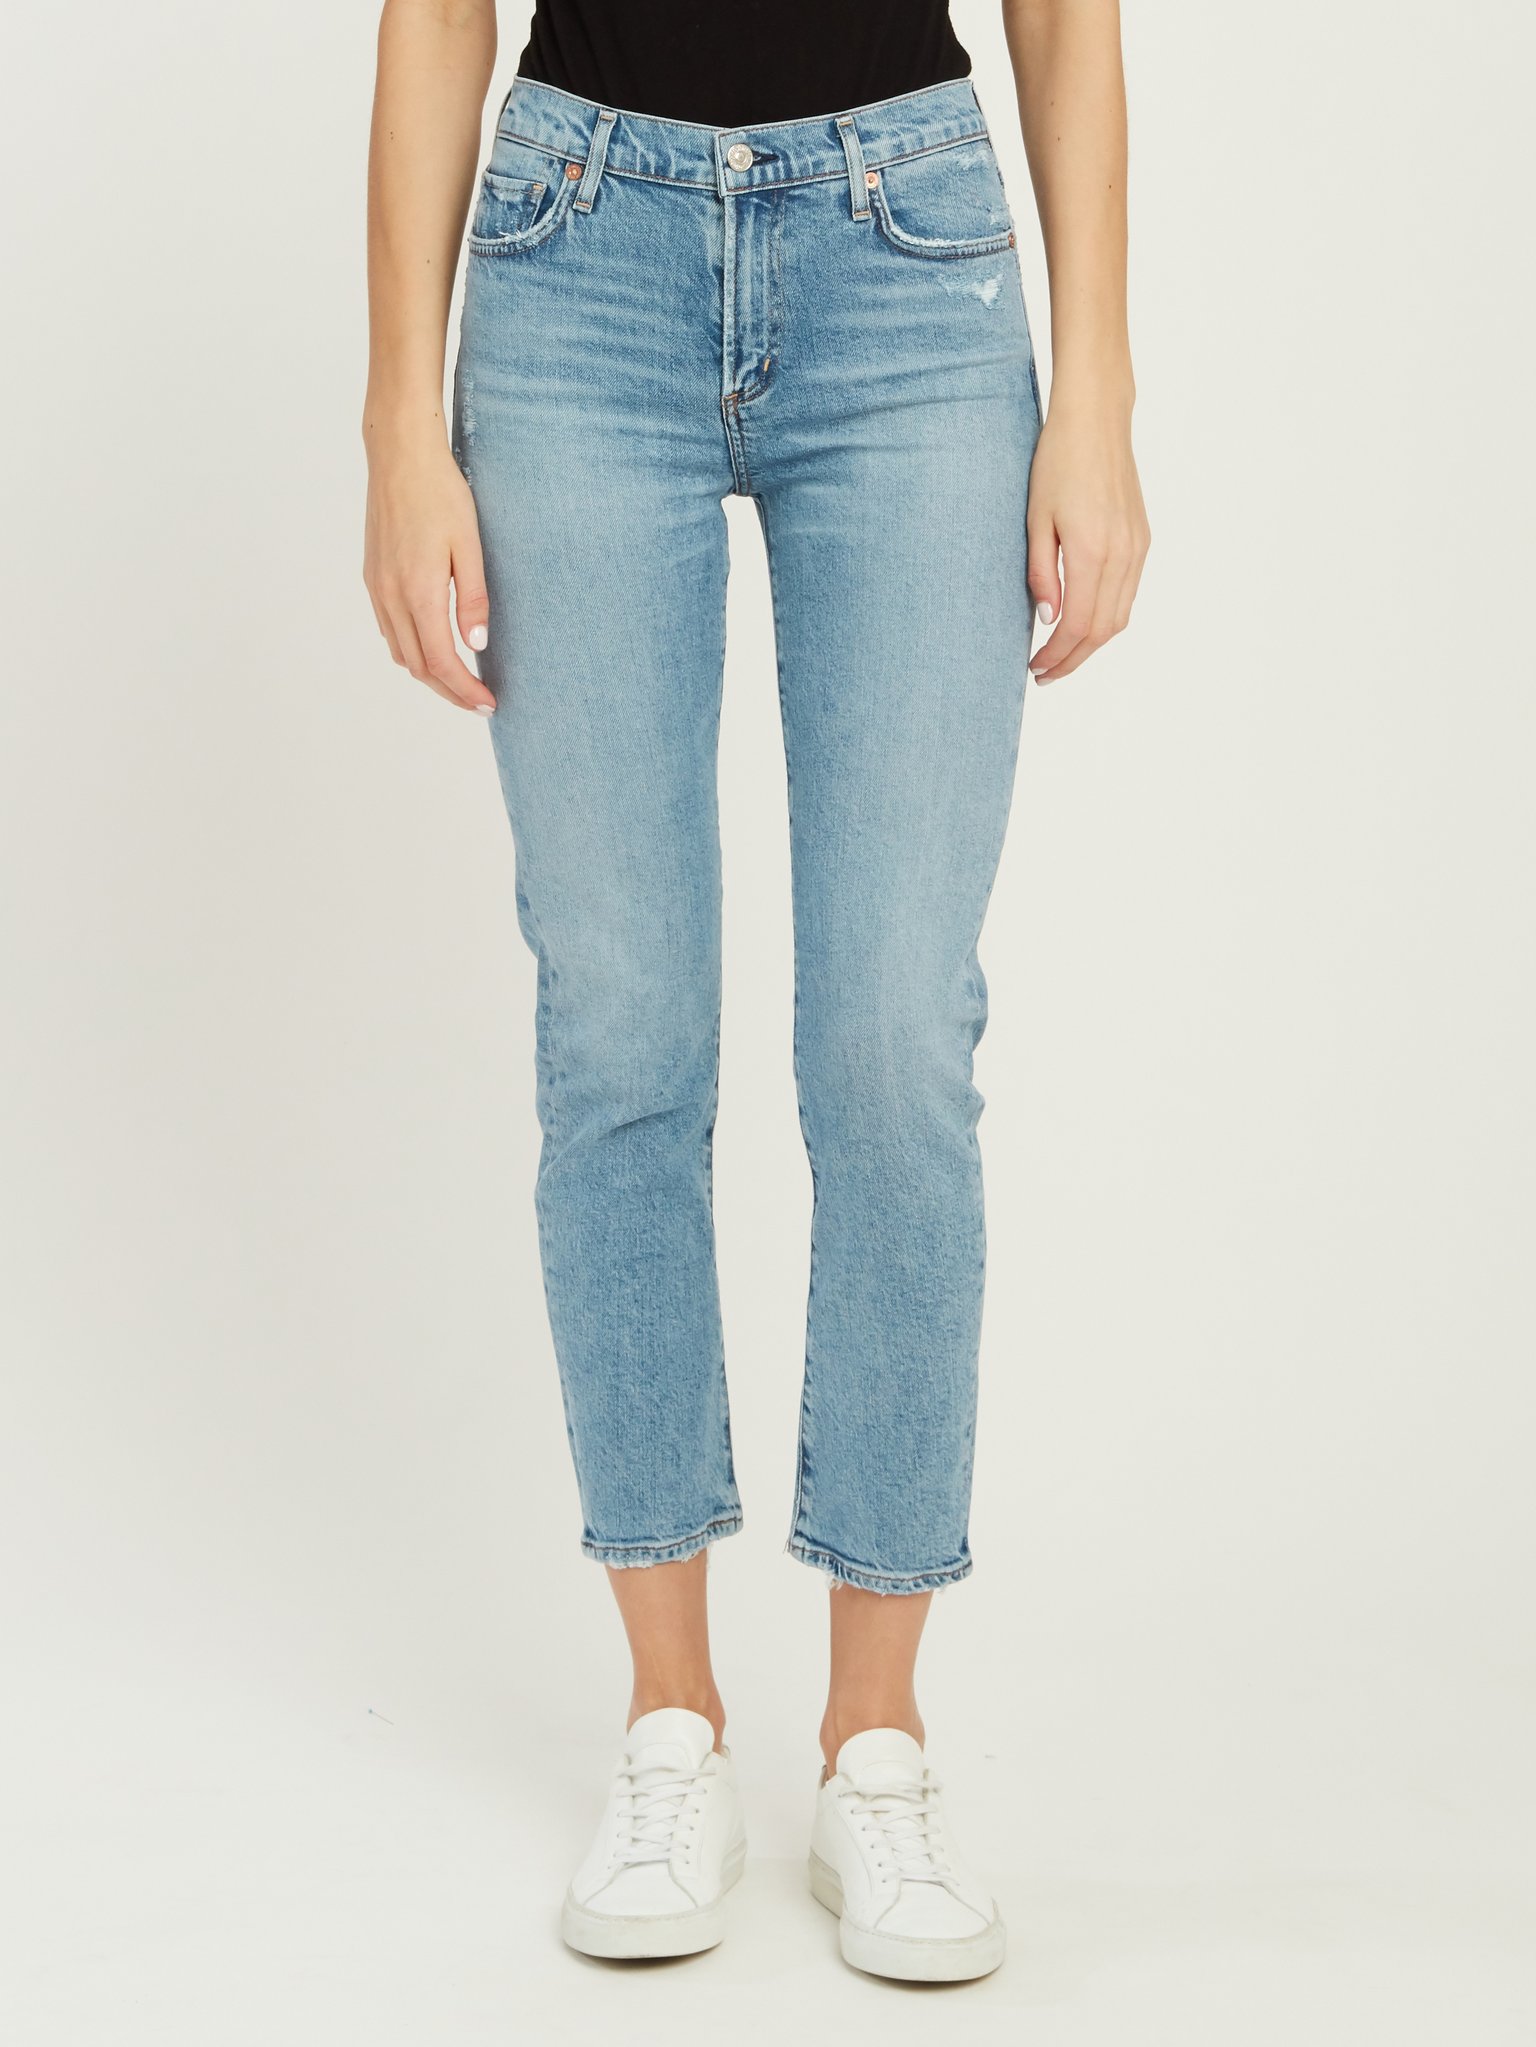 Citizens of Humanity Harlow Mid Rise Ankle Cut Slim Jeans | Verishop